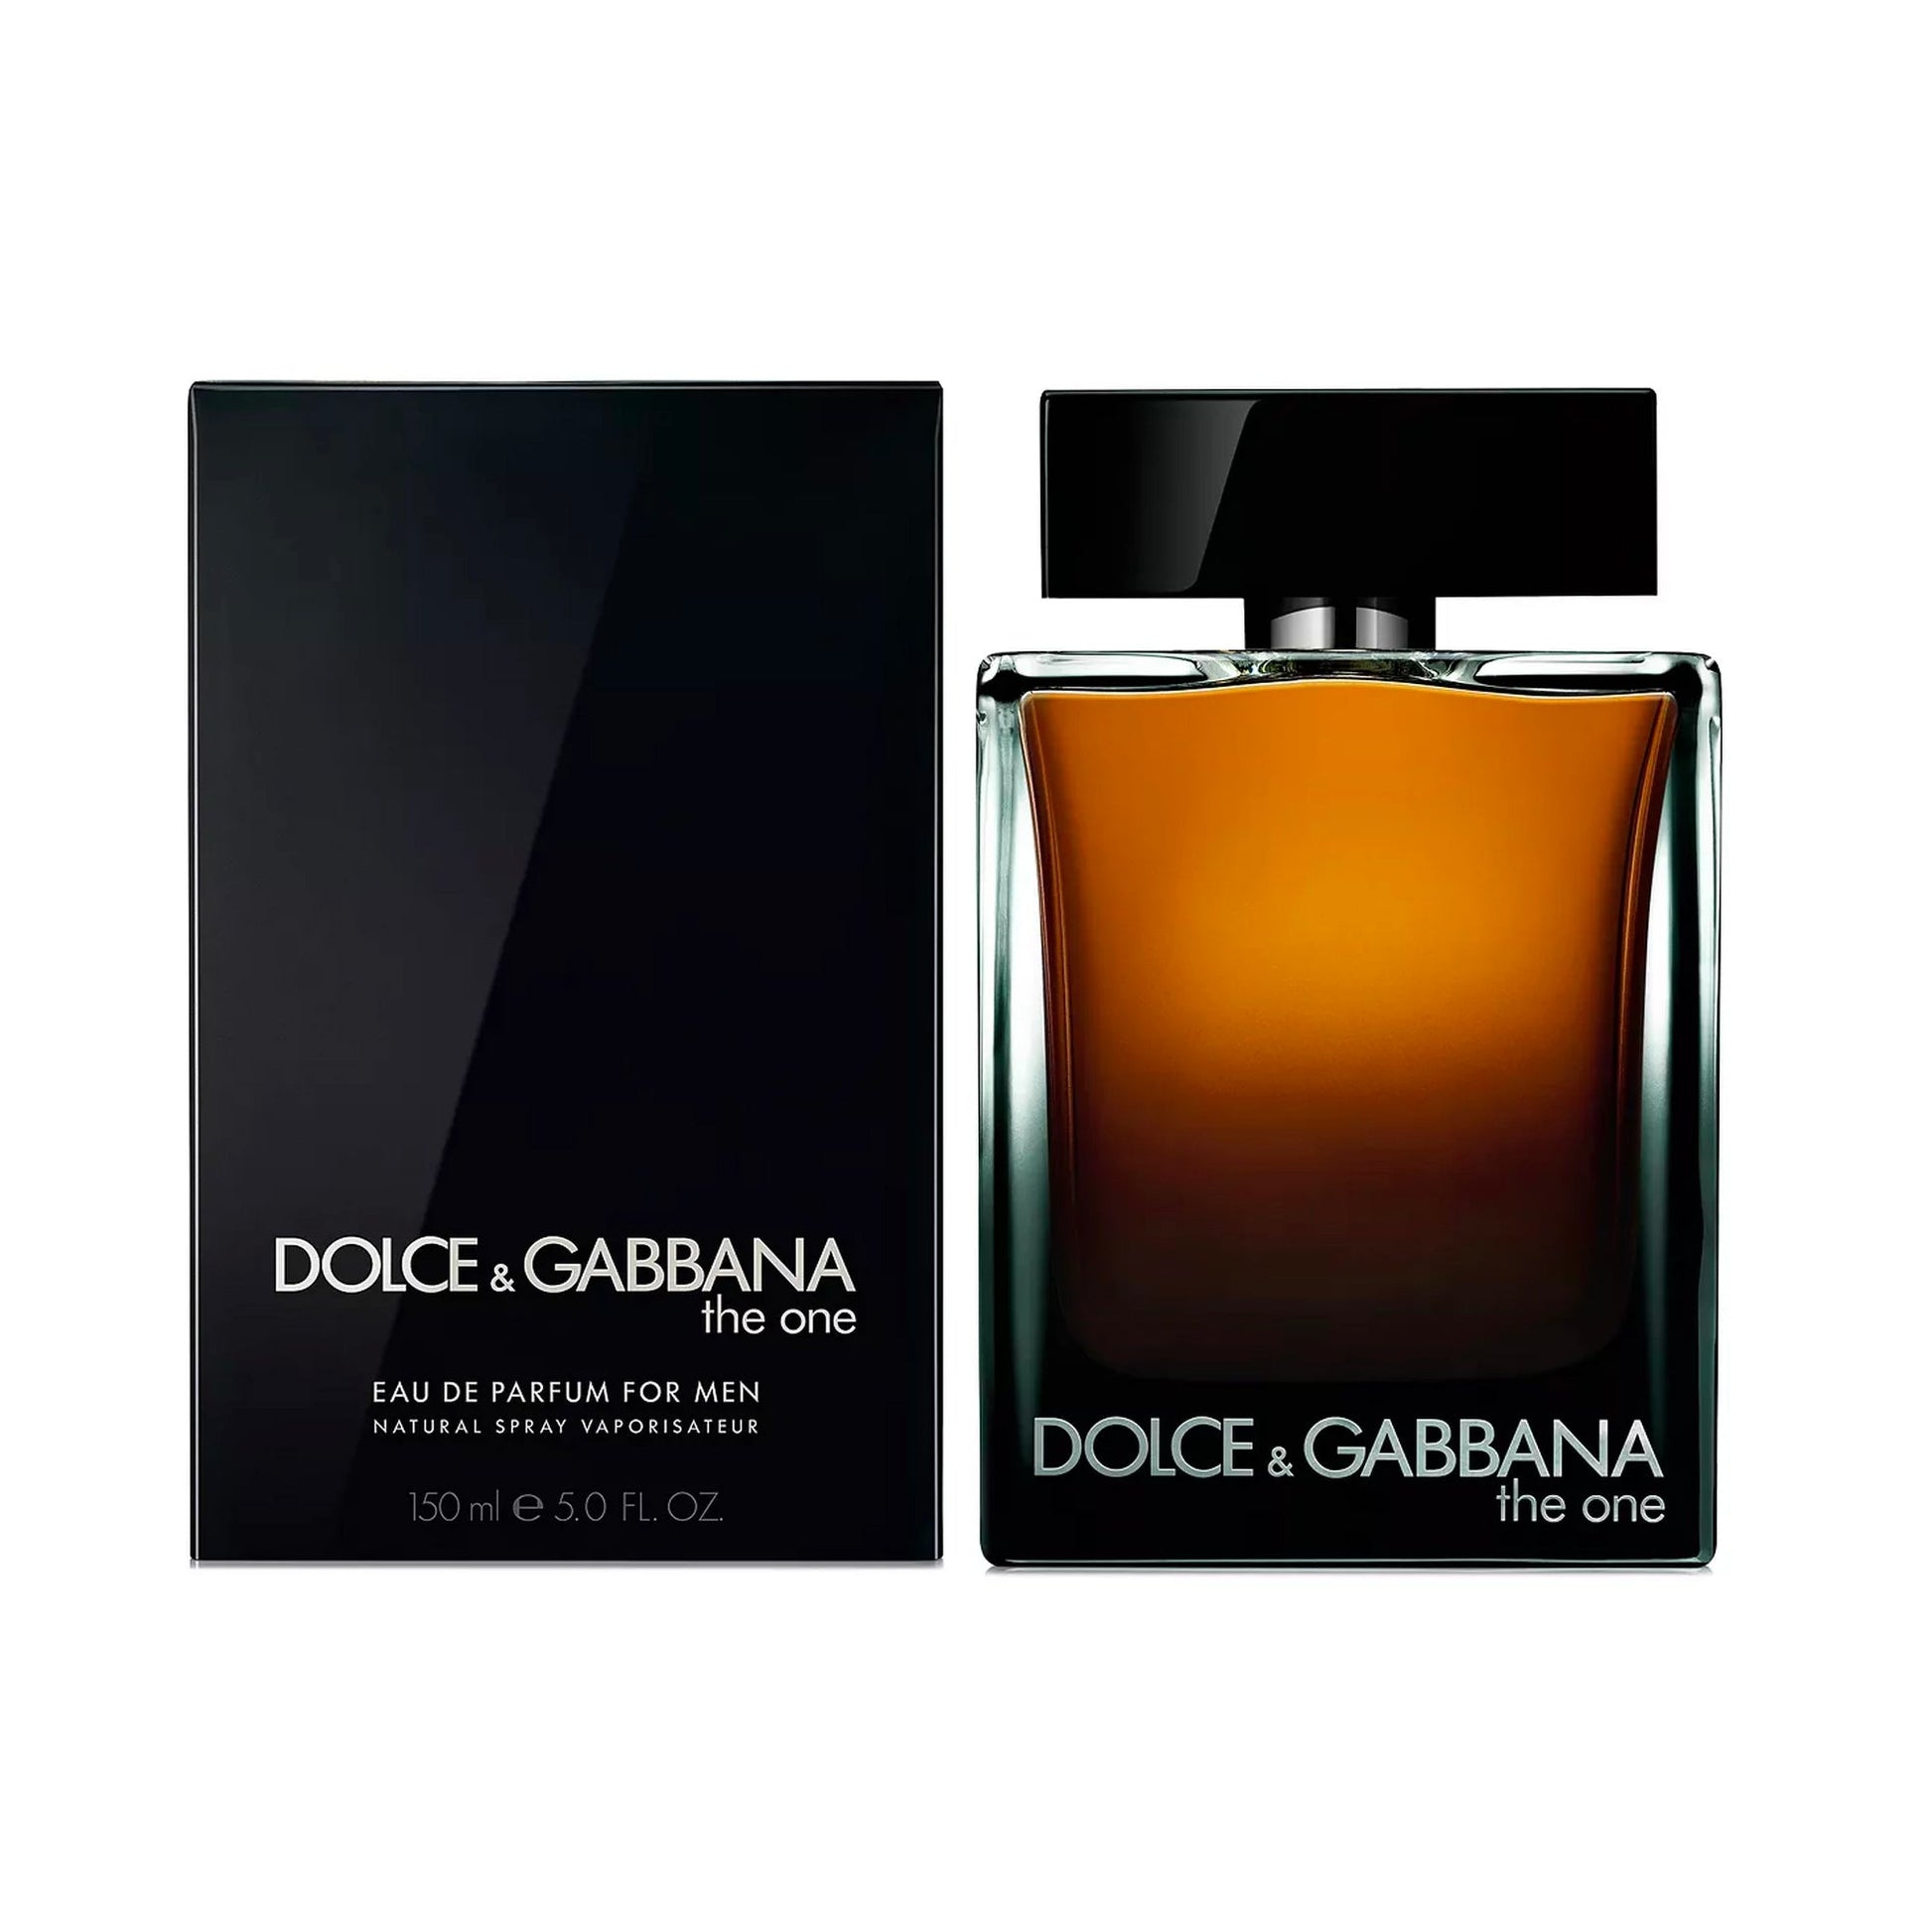 The One Eau de Parfum Spray for Men by Dolce and Gabbana, Product image 1